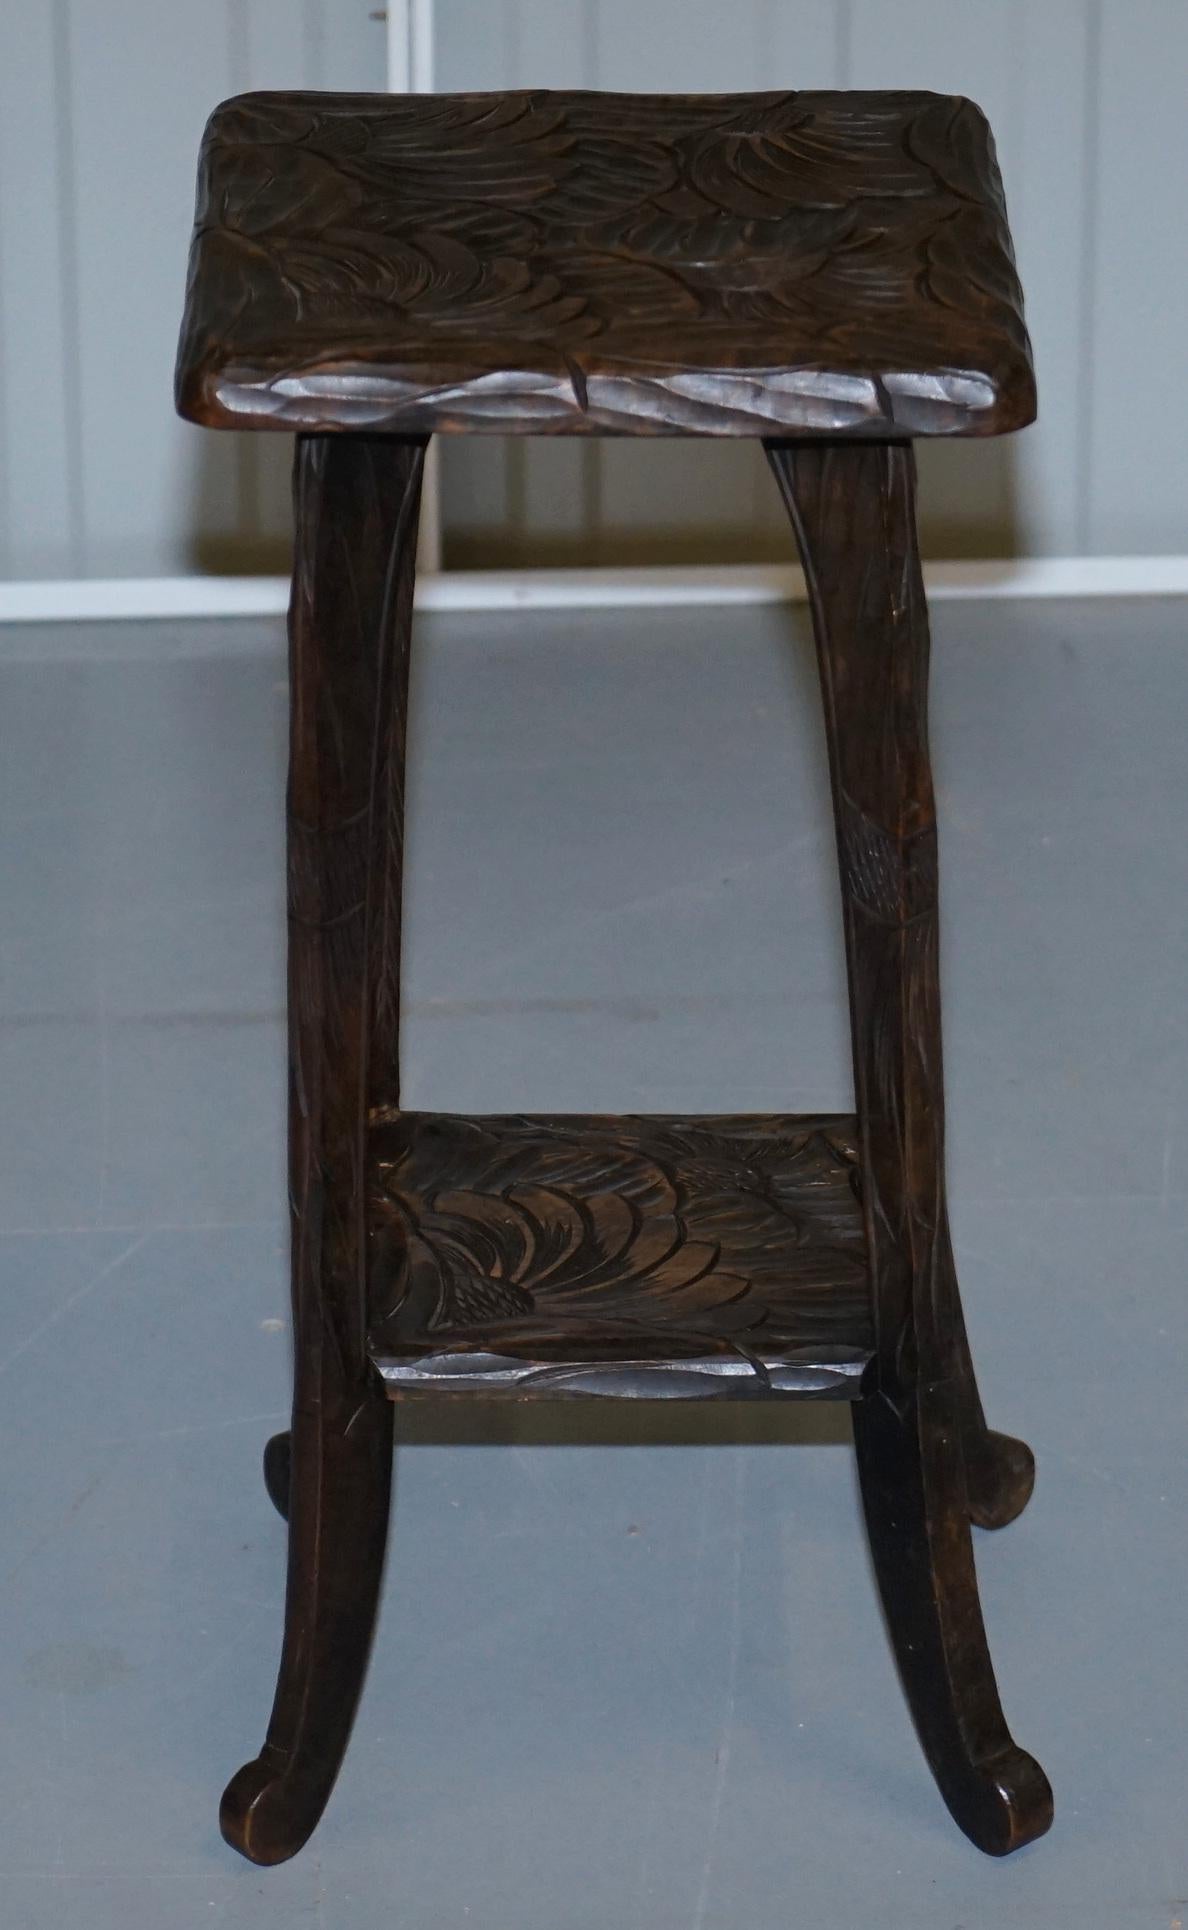 We are delighted to offer for sale this lovely large small Liberty’s London 1905 Japanese mahogany side table or jardinière plant pot stand table

A good looking piece, its hand carved from top to bottom with floral detailing, I have another of